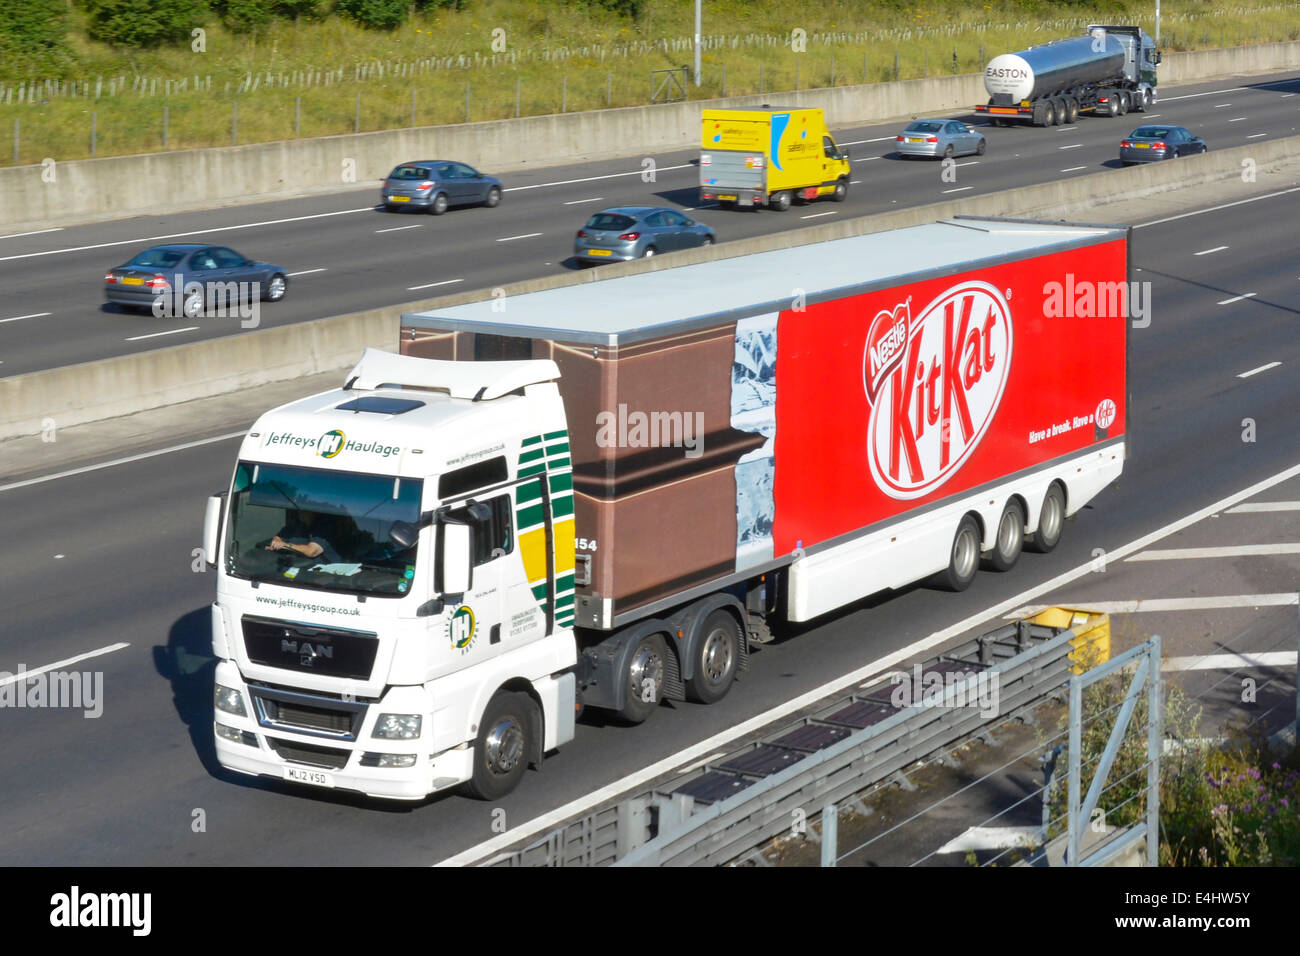 Nestlé Kit Kat chocolate bar & wrapper graphics on side of articulated trailer advertising product behind hgv lorry truck driving along uk  motorway Stock Photo